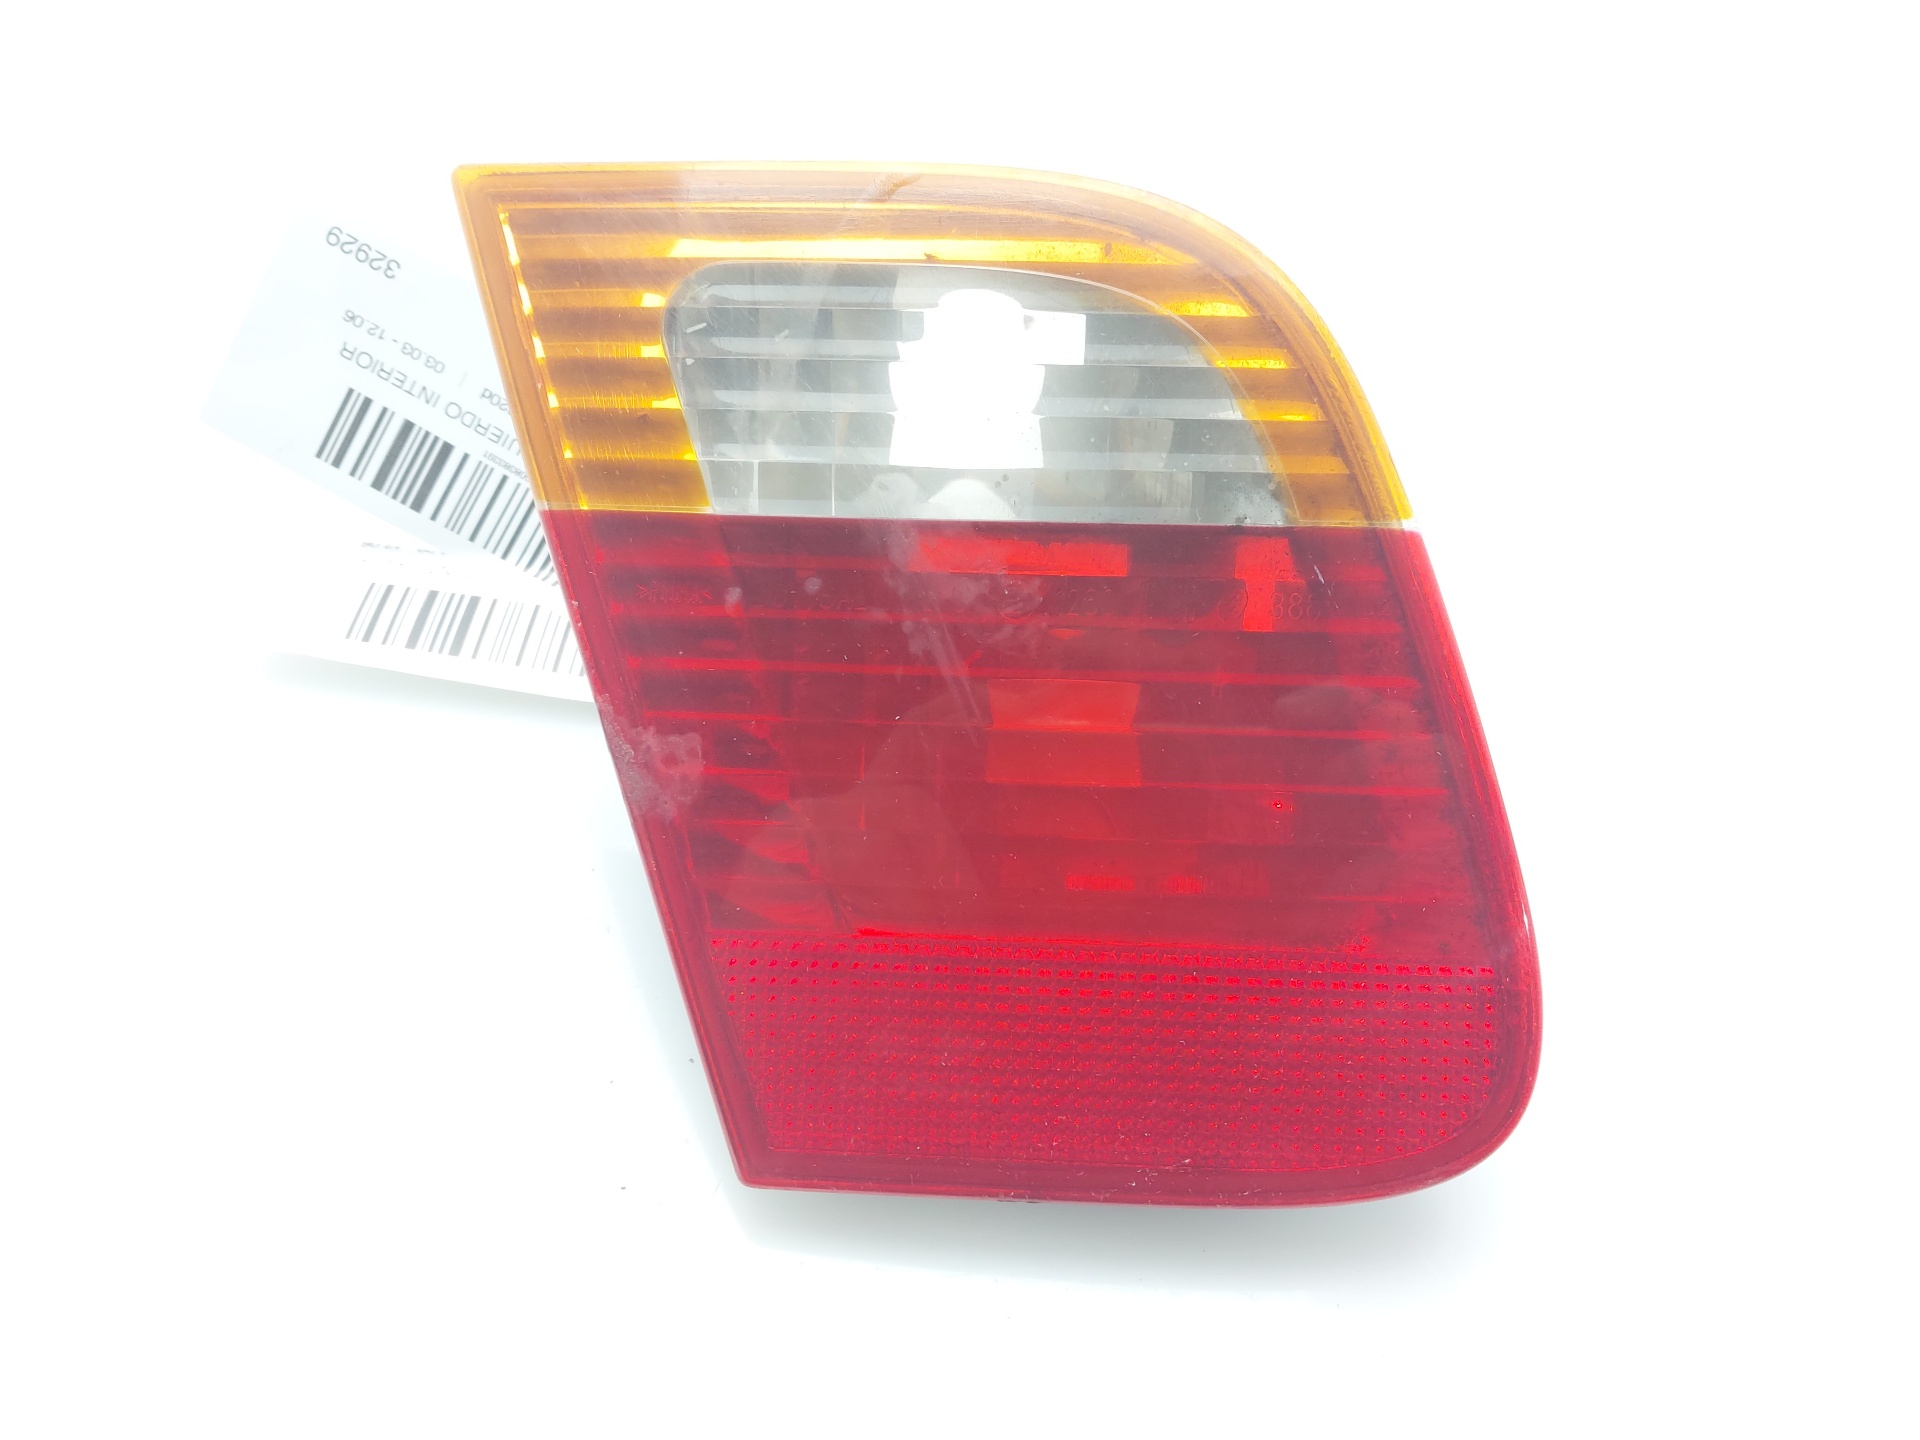 BMW 3 Series E46 (1997-2006) Rear Left Taillight 6907945 24140171